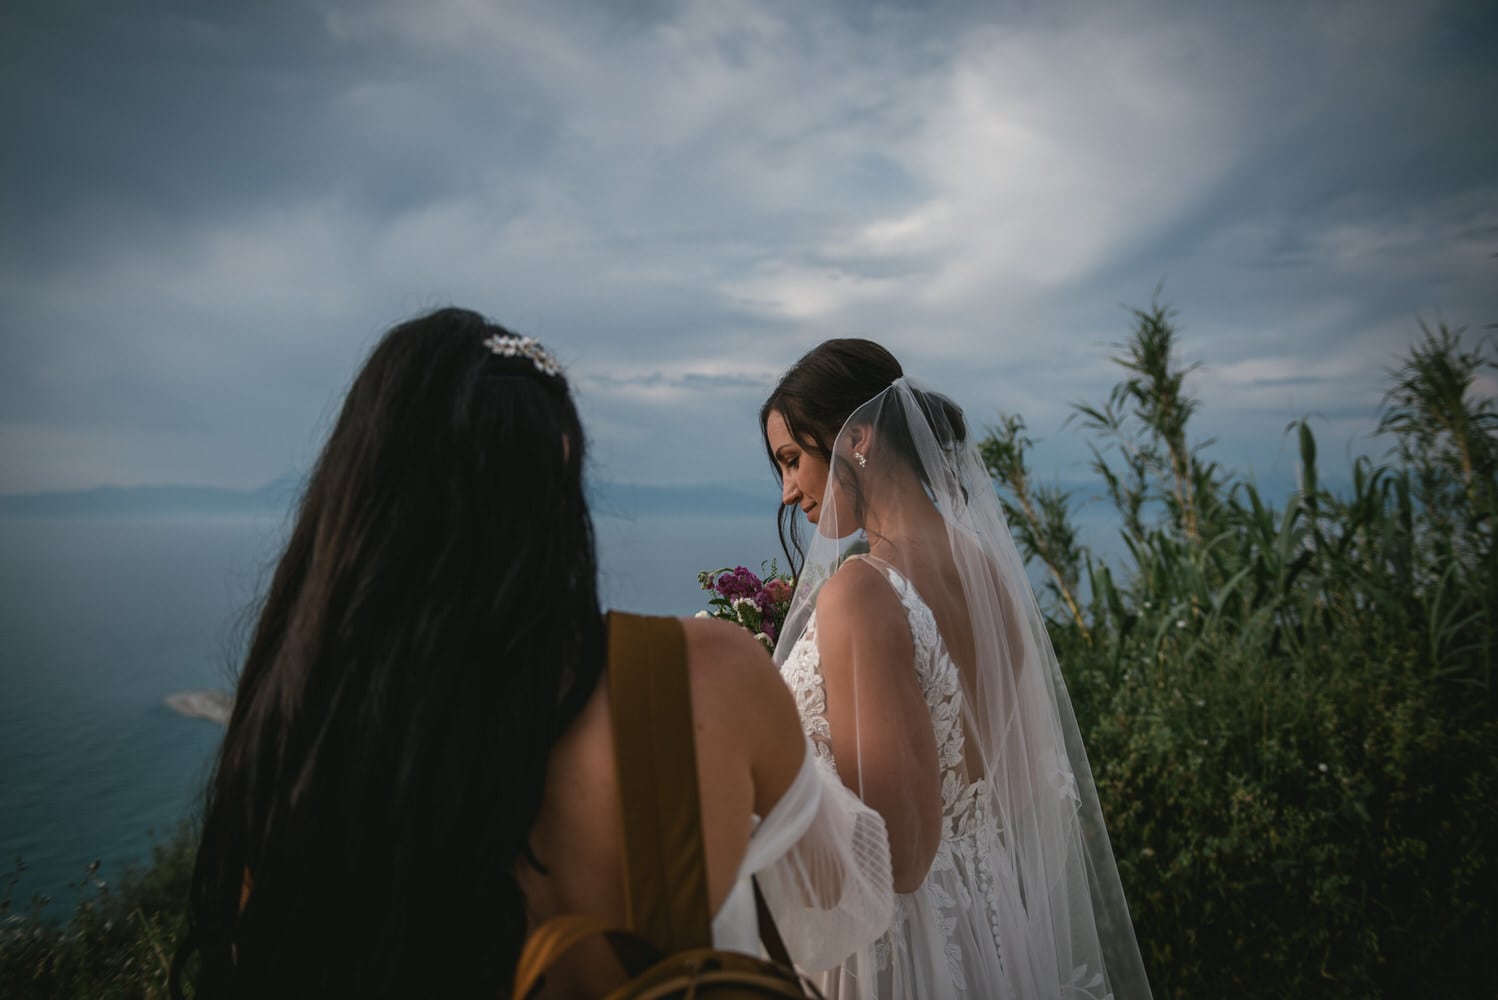 Bride's veil caught in the breeze, ethereal beauty on her Corfu elopement.